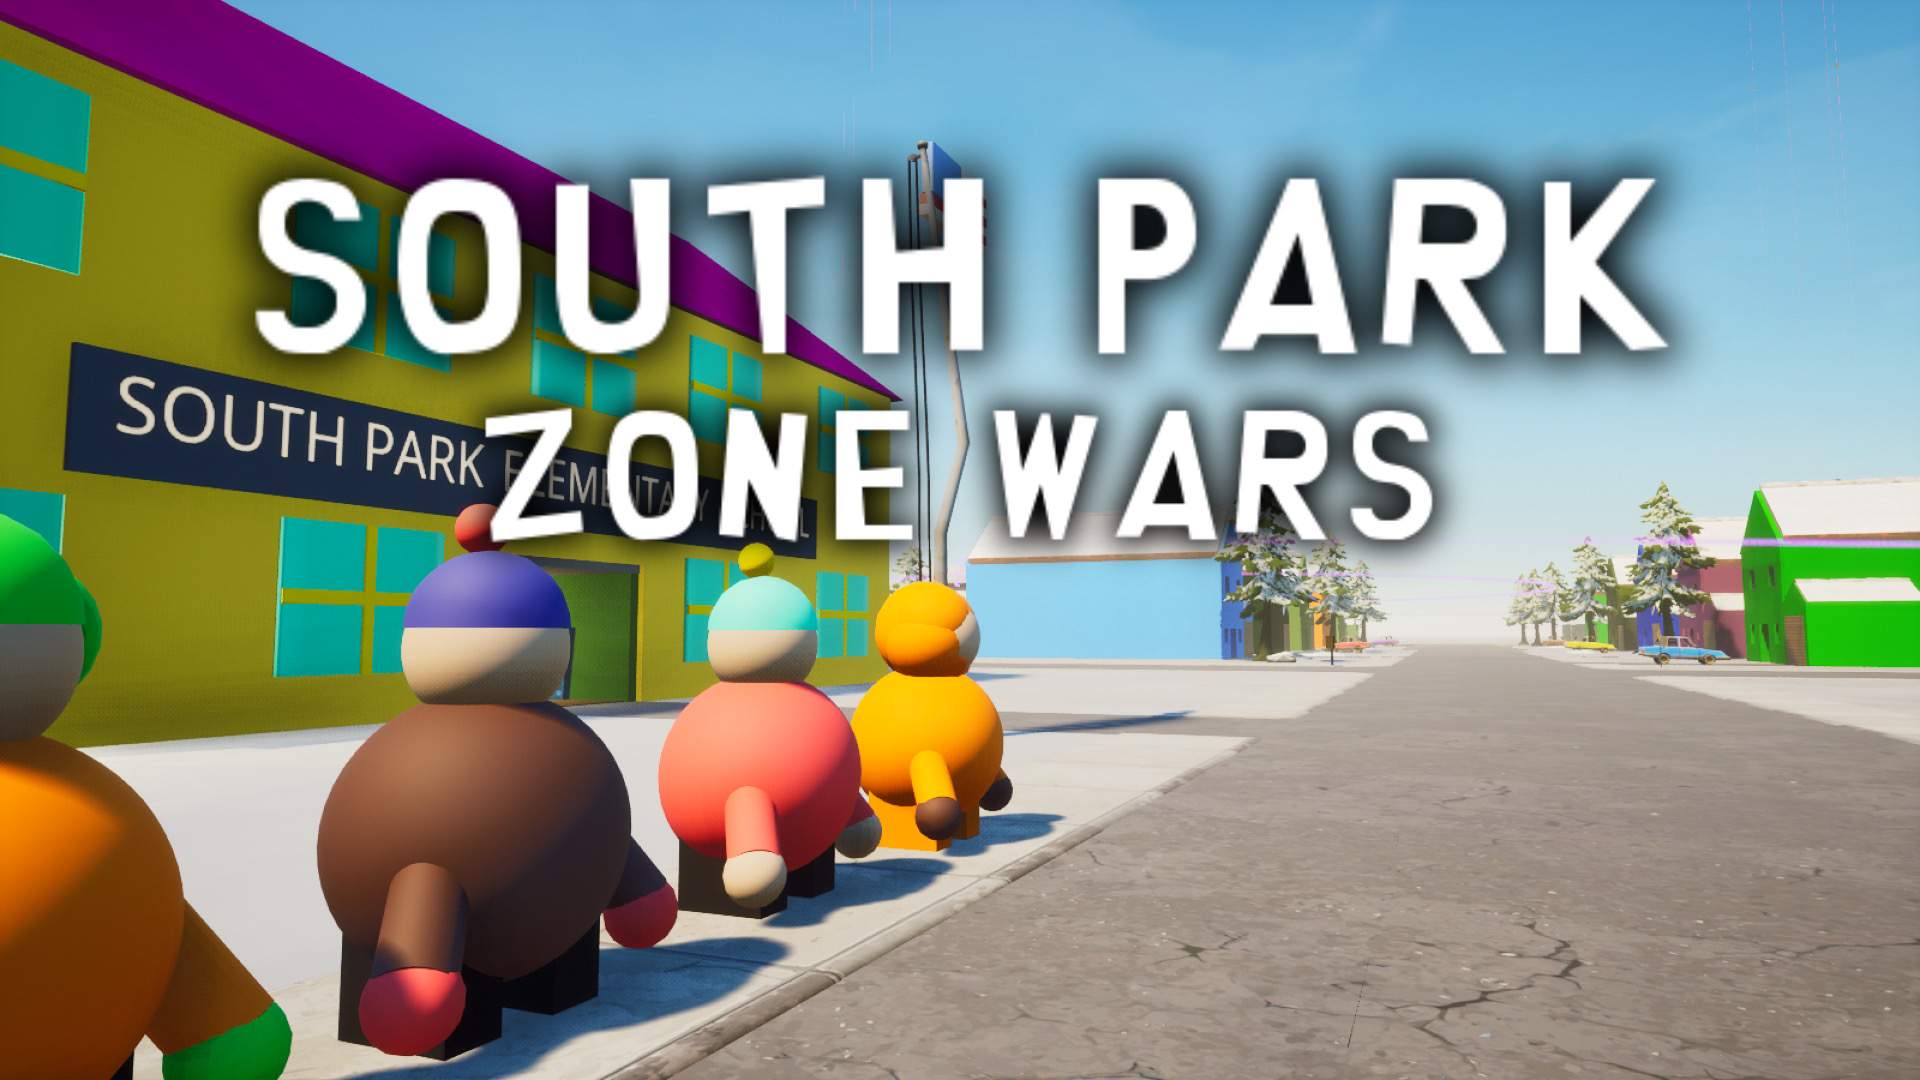 SOUTH PARK ZONE WARS